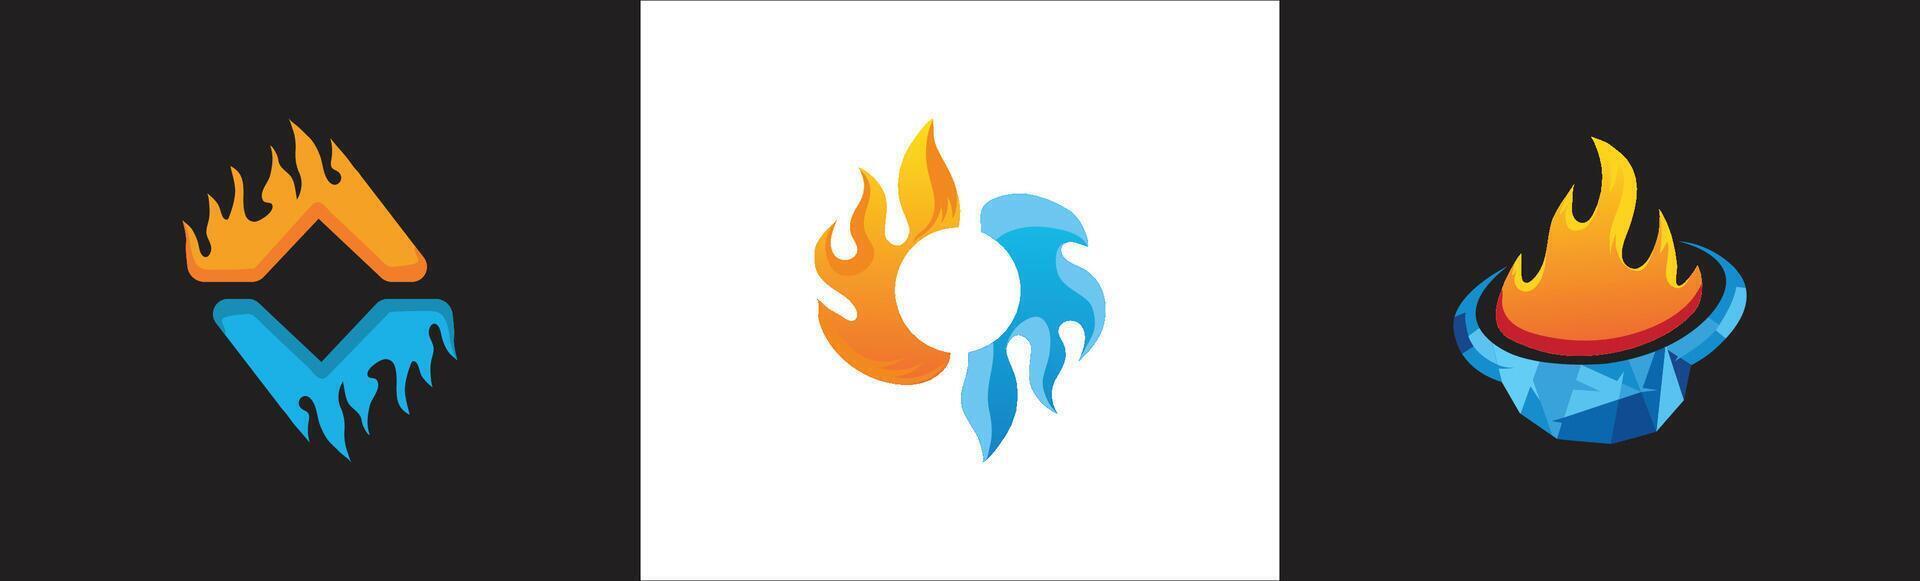 fire ice logo collection with 3 shapes vector